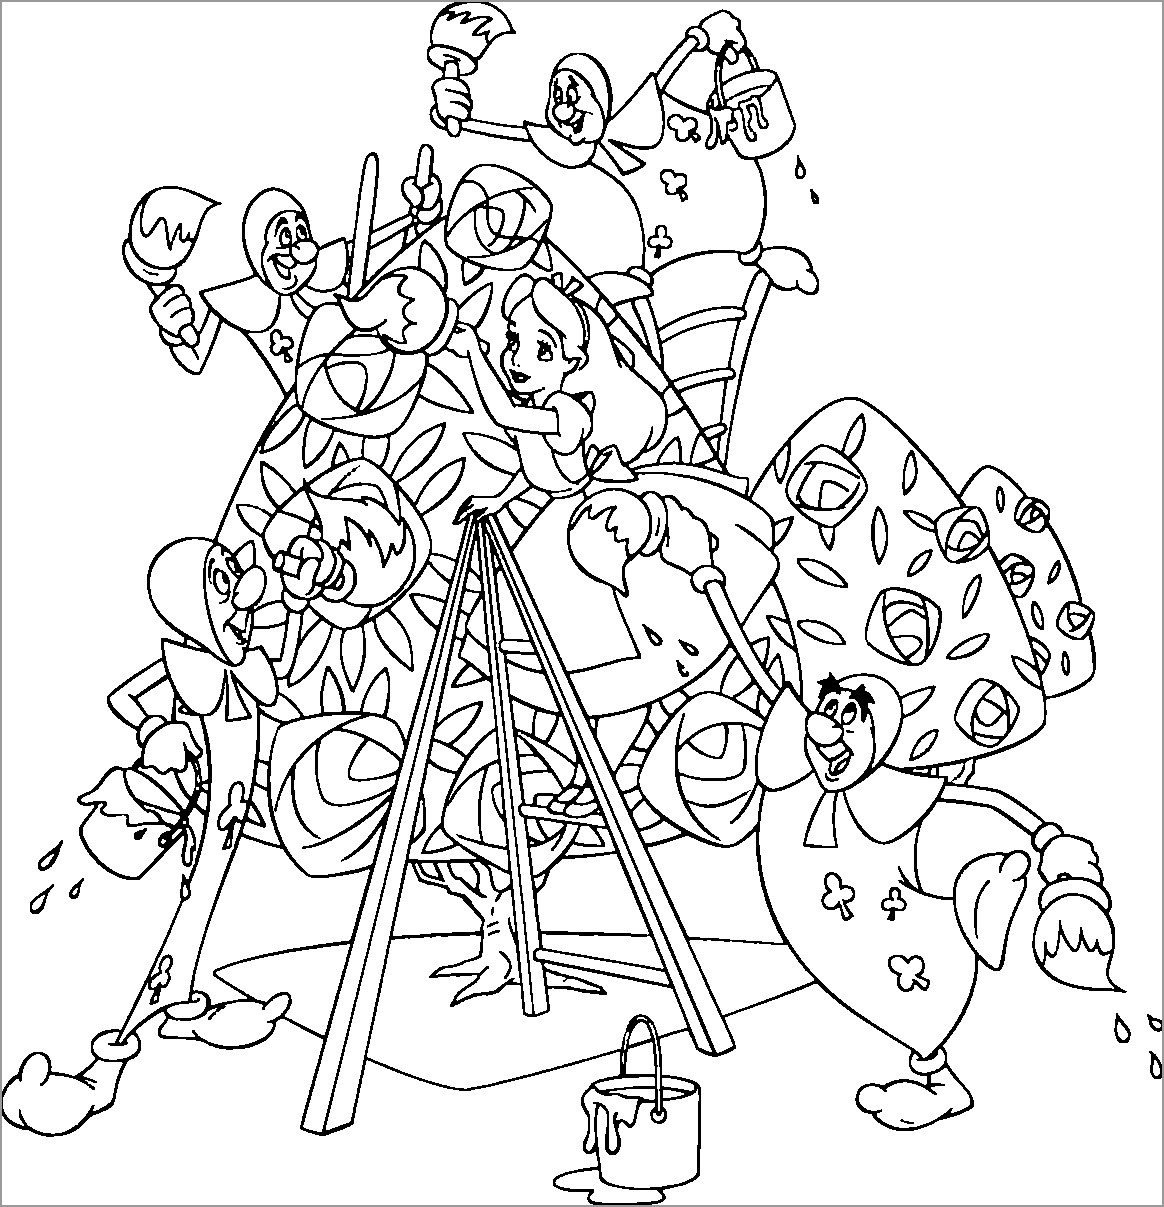 Printable Alice In Wonderland Coloring Page for Kids